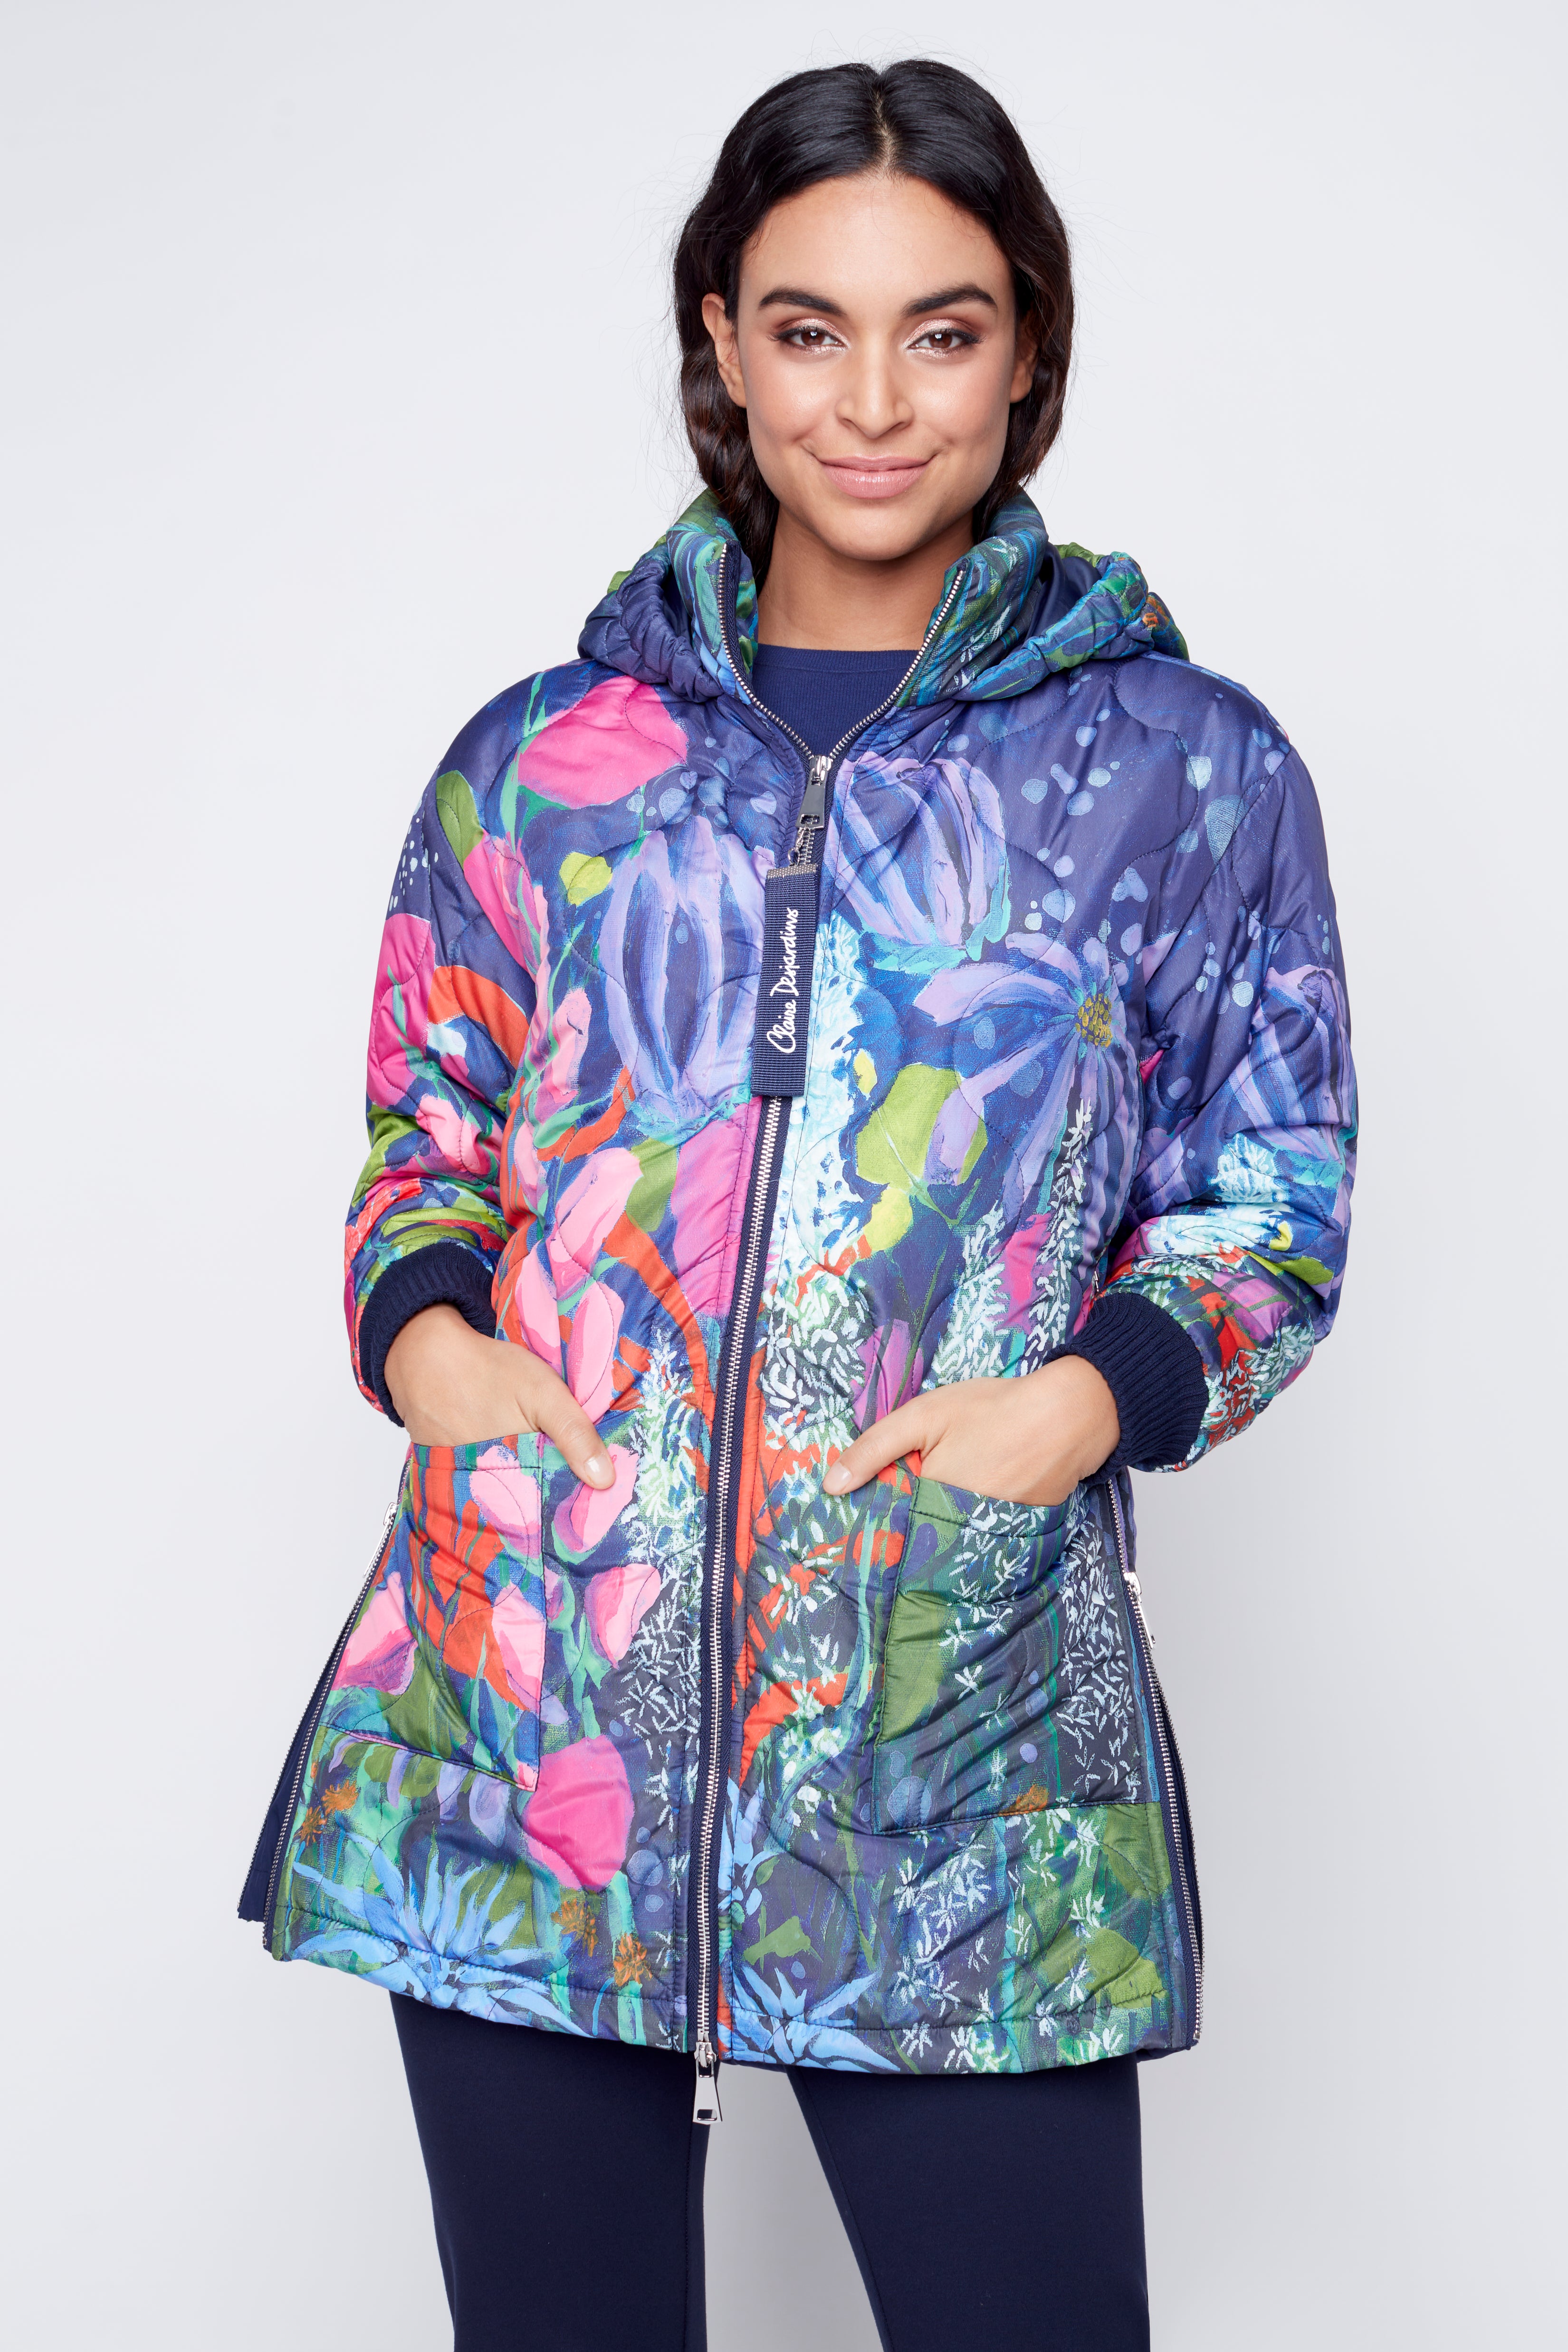 Of Fragrance & Flowers front pocket zip-up jacket – The Wearable Art Store